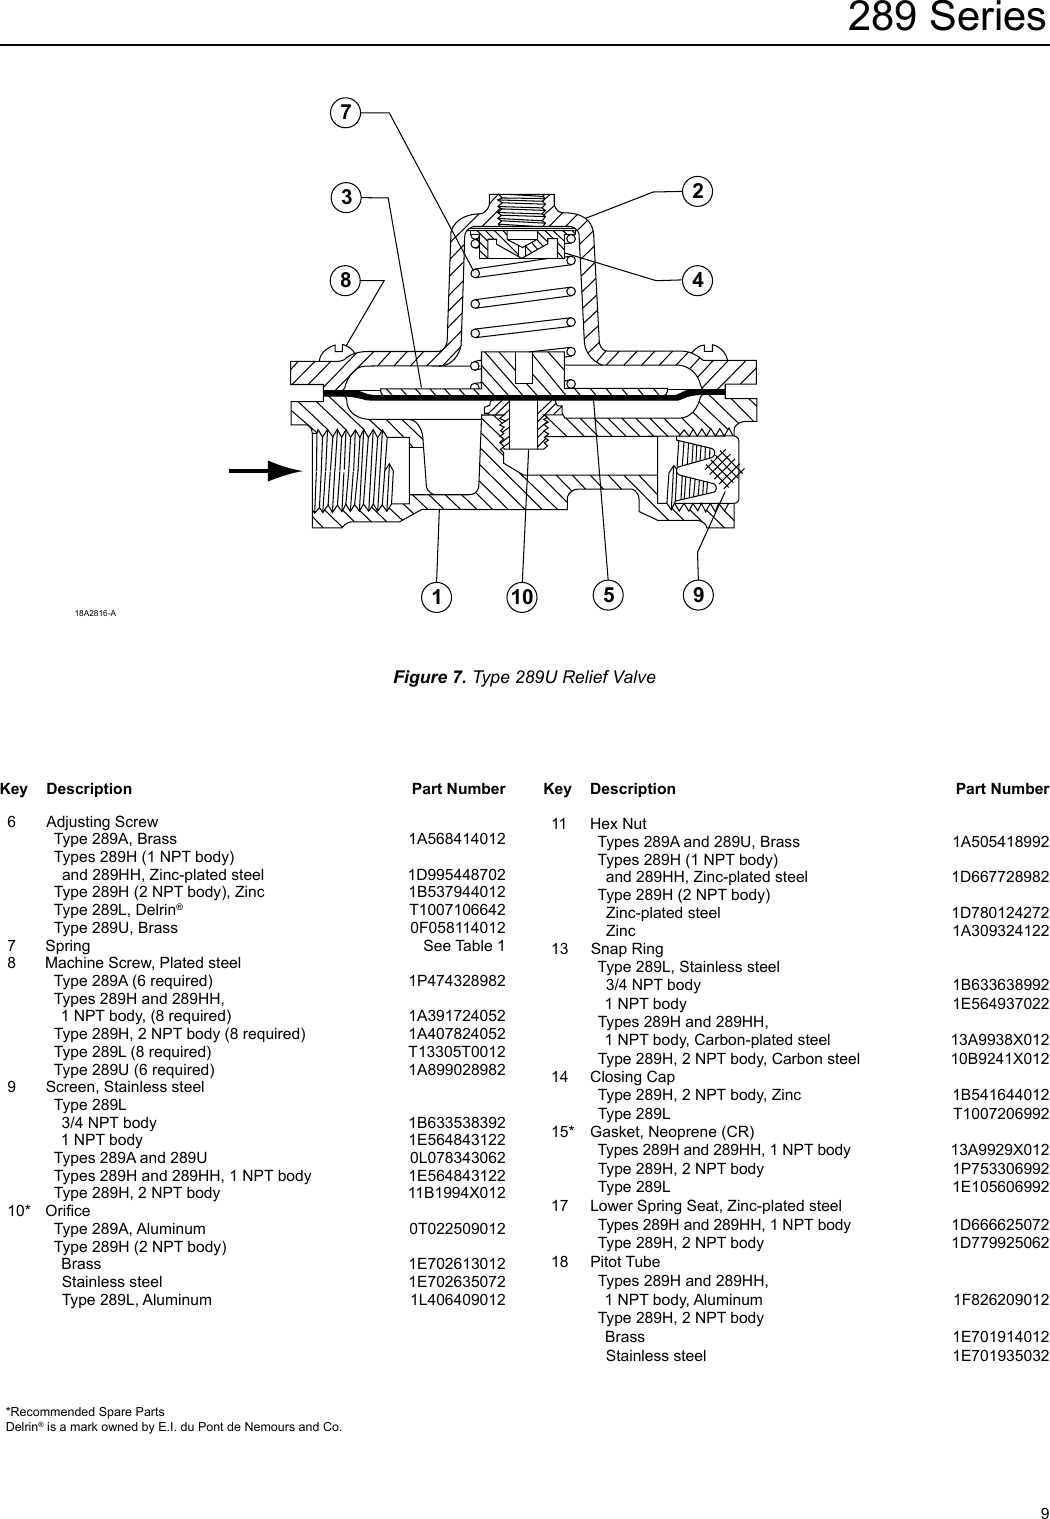 Page 9 of 12 - Emerson Emerson-289-Series-Relief-Valves-Backpressure-Regulators-Instruction-Manual-  Emerson-289-series-relief-valves-backpressure-regulators-instruction-manual